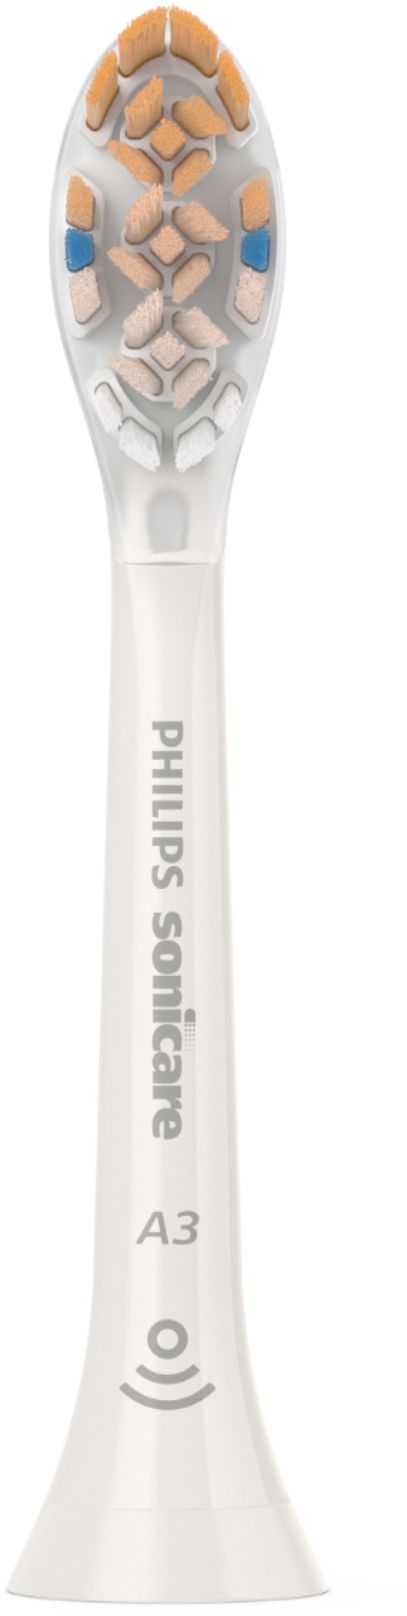 Left View: Philips Sonicare - Premium All-in-One (A3) Replacement Toothbrush Heads, (2-pack) - White